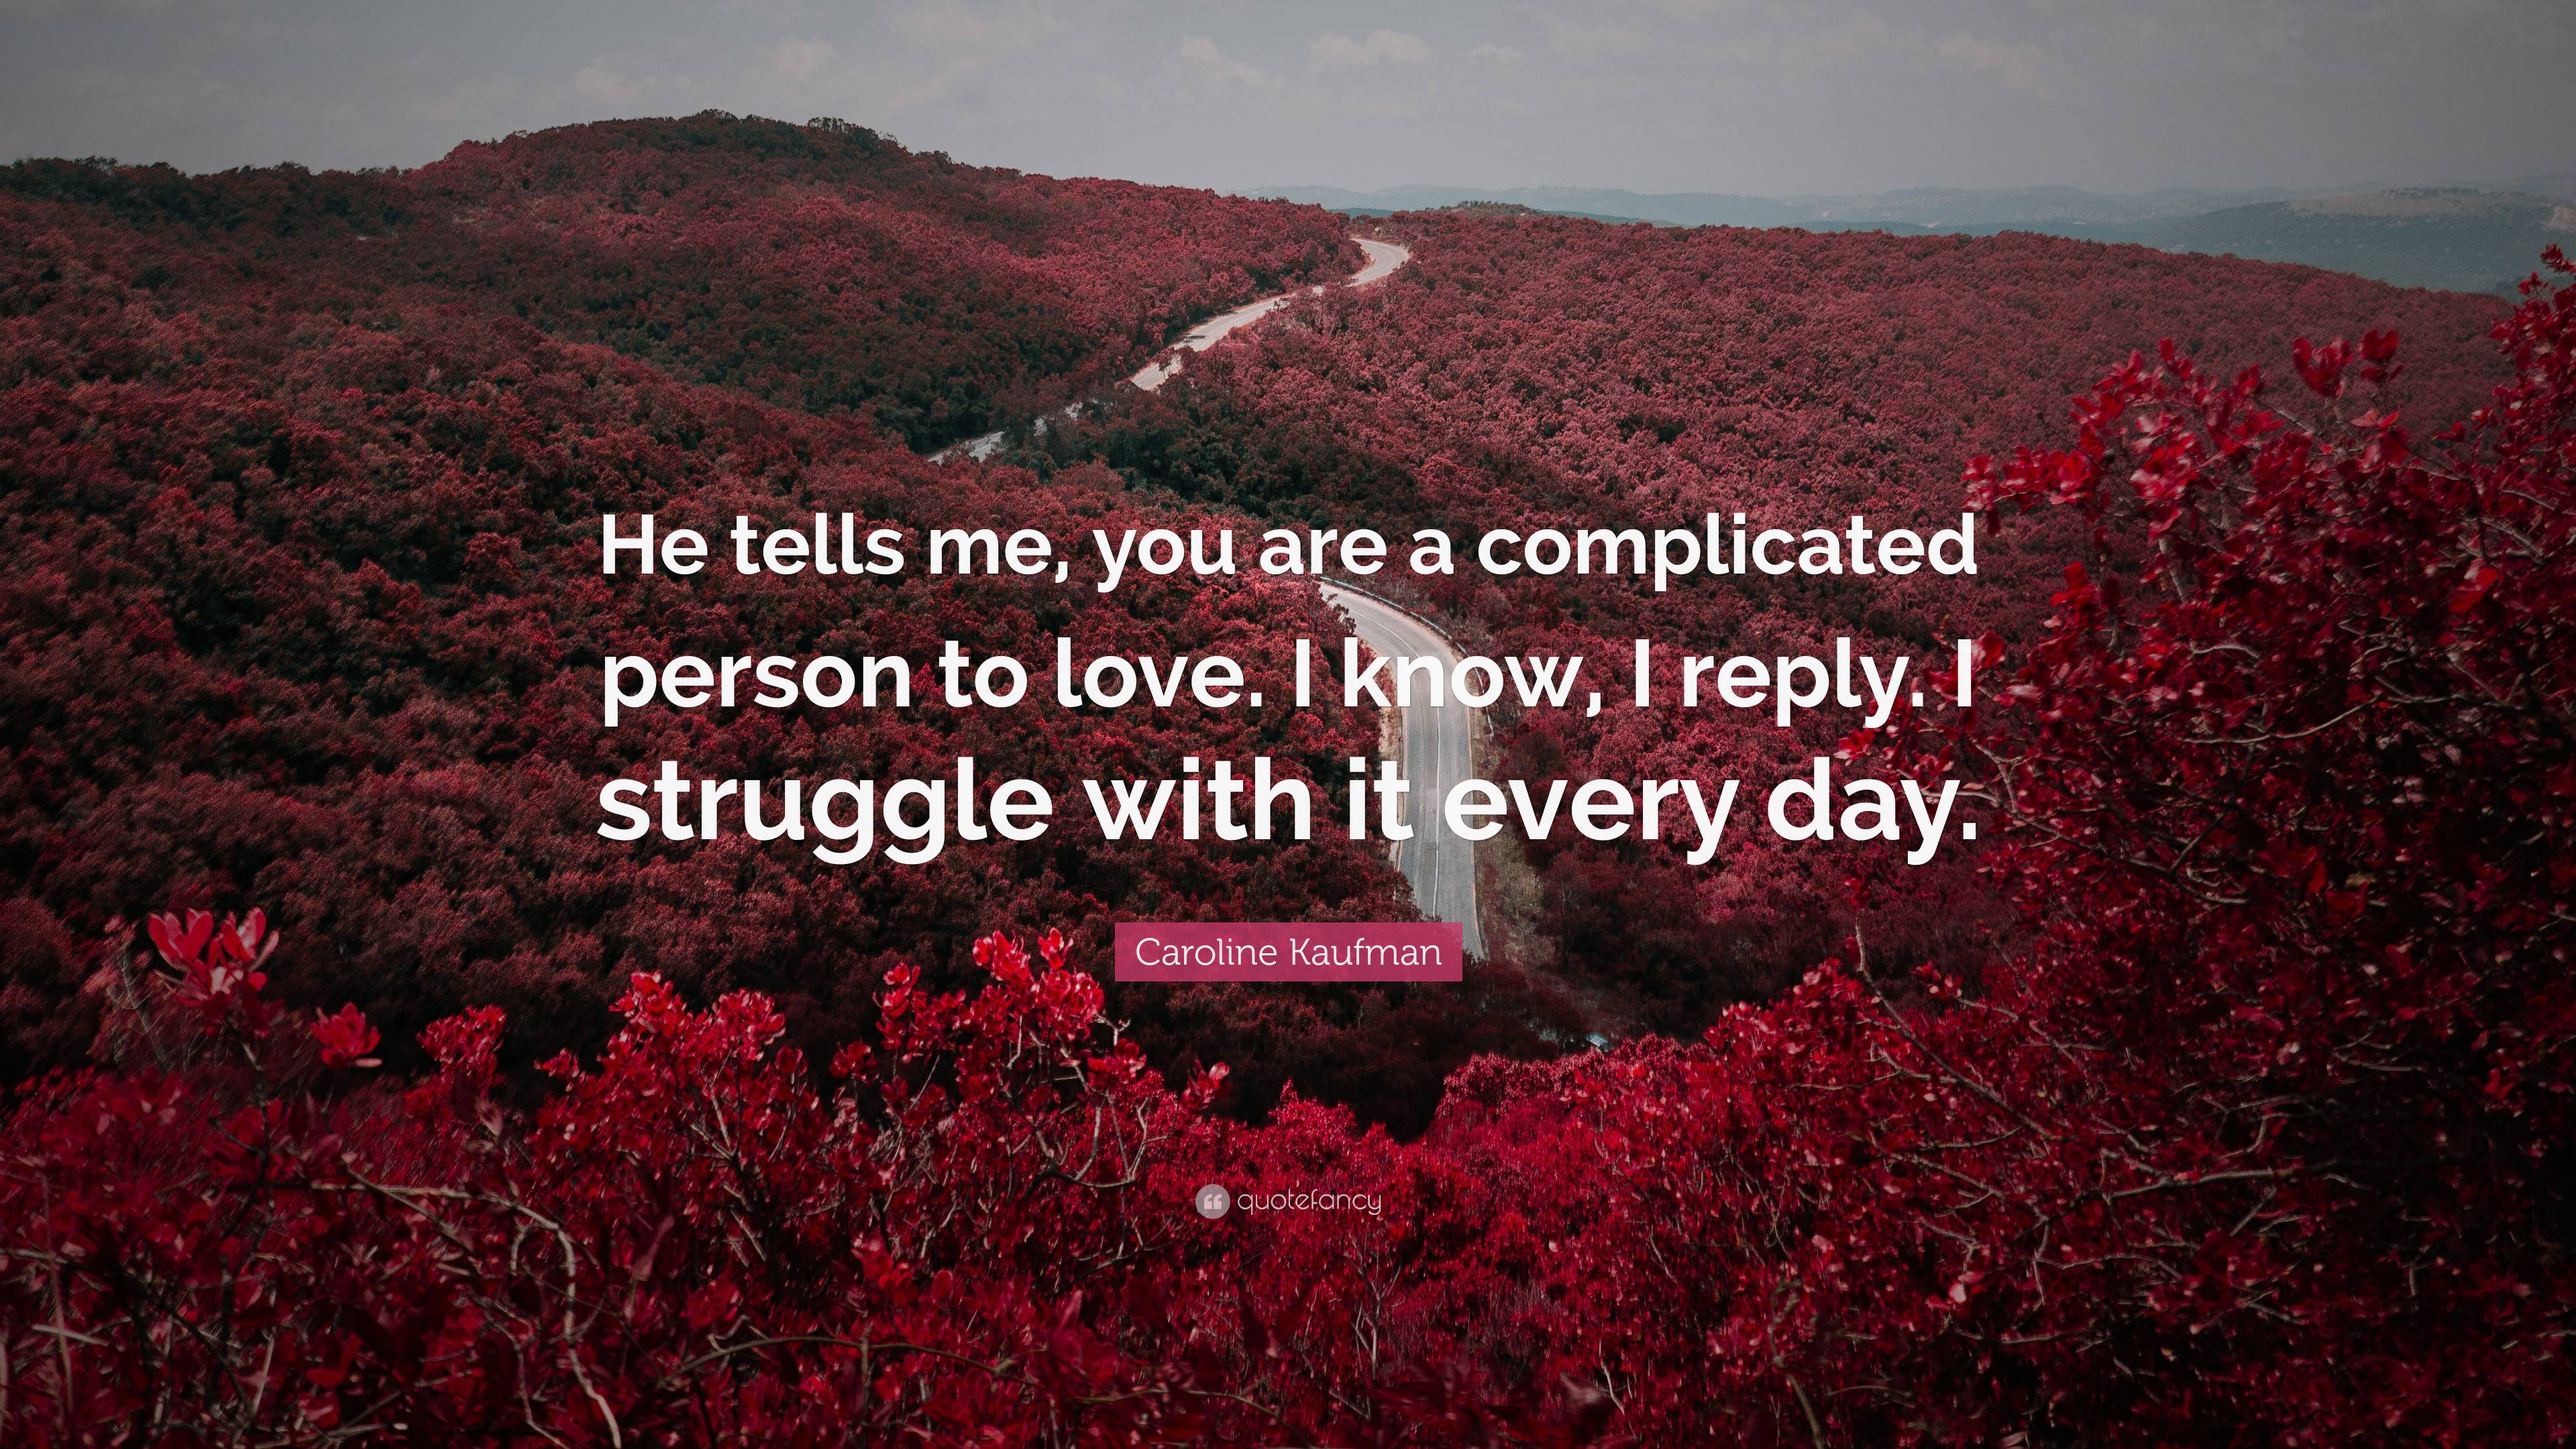 Caroline Kaufman Quote: “He tells me, you are a complicated person to ...